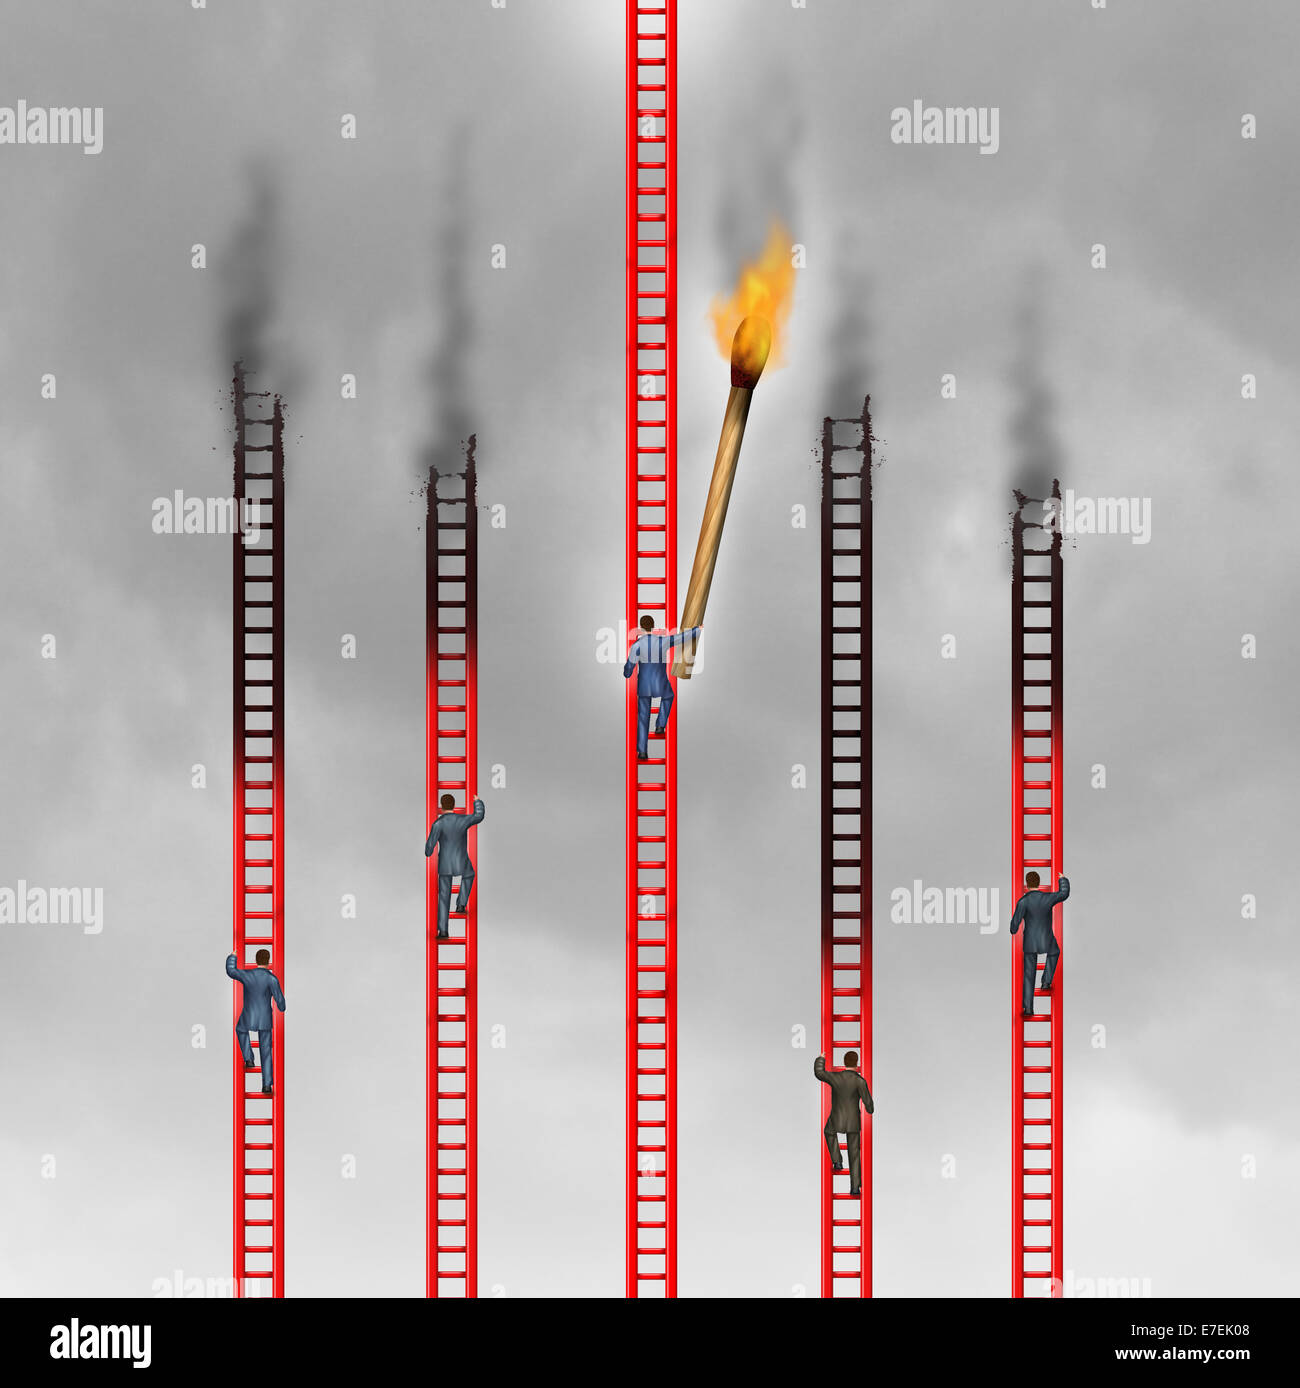 Competition in business concept as a group of business people climbing red ladders competing for the top but one aggressive person as a game changer uses a giant match to stop their path to success. Stock Photo